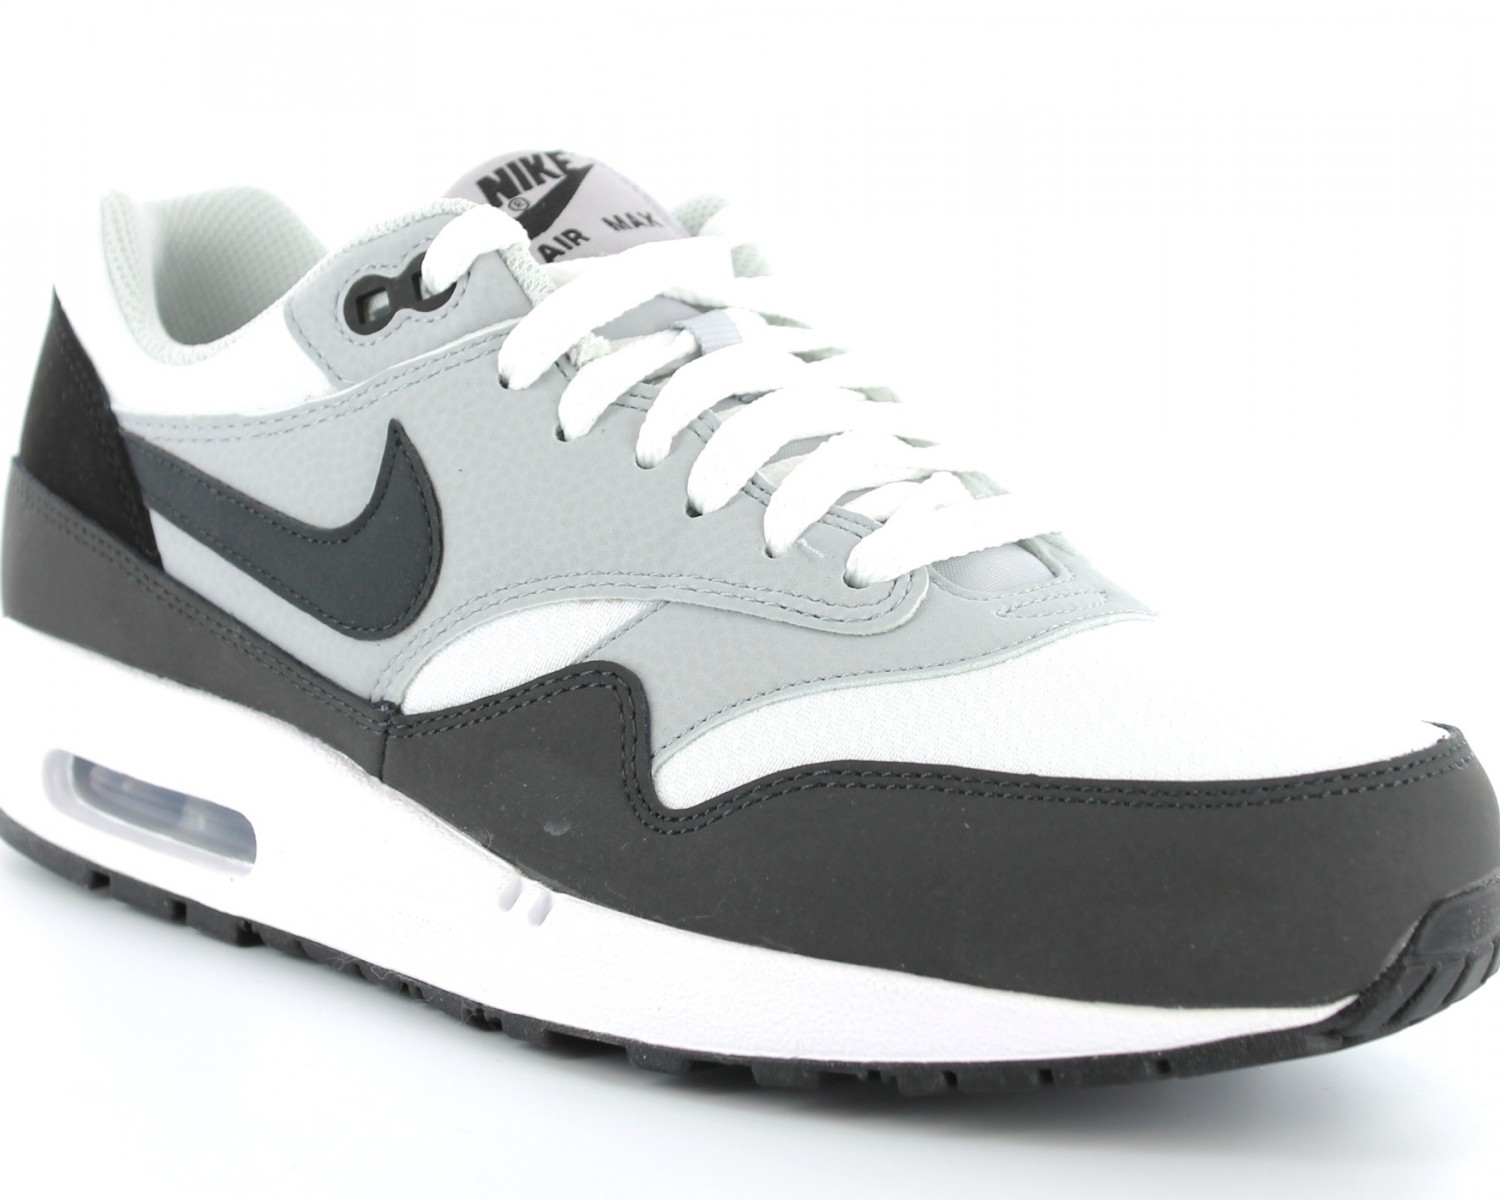 air max one grise et blanche